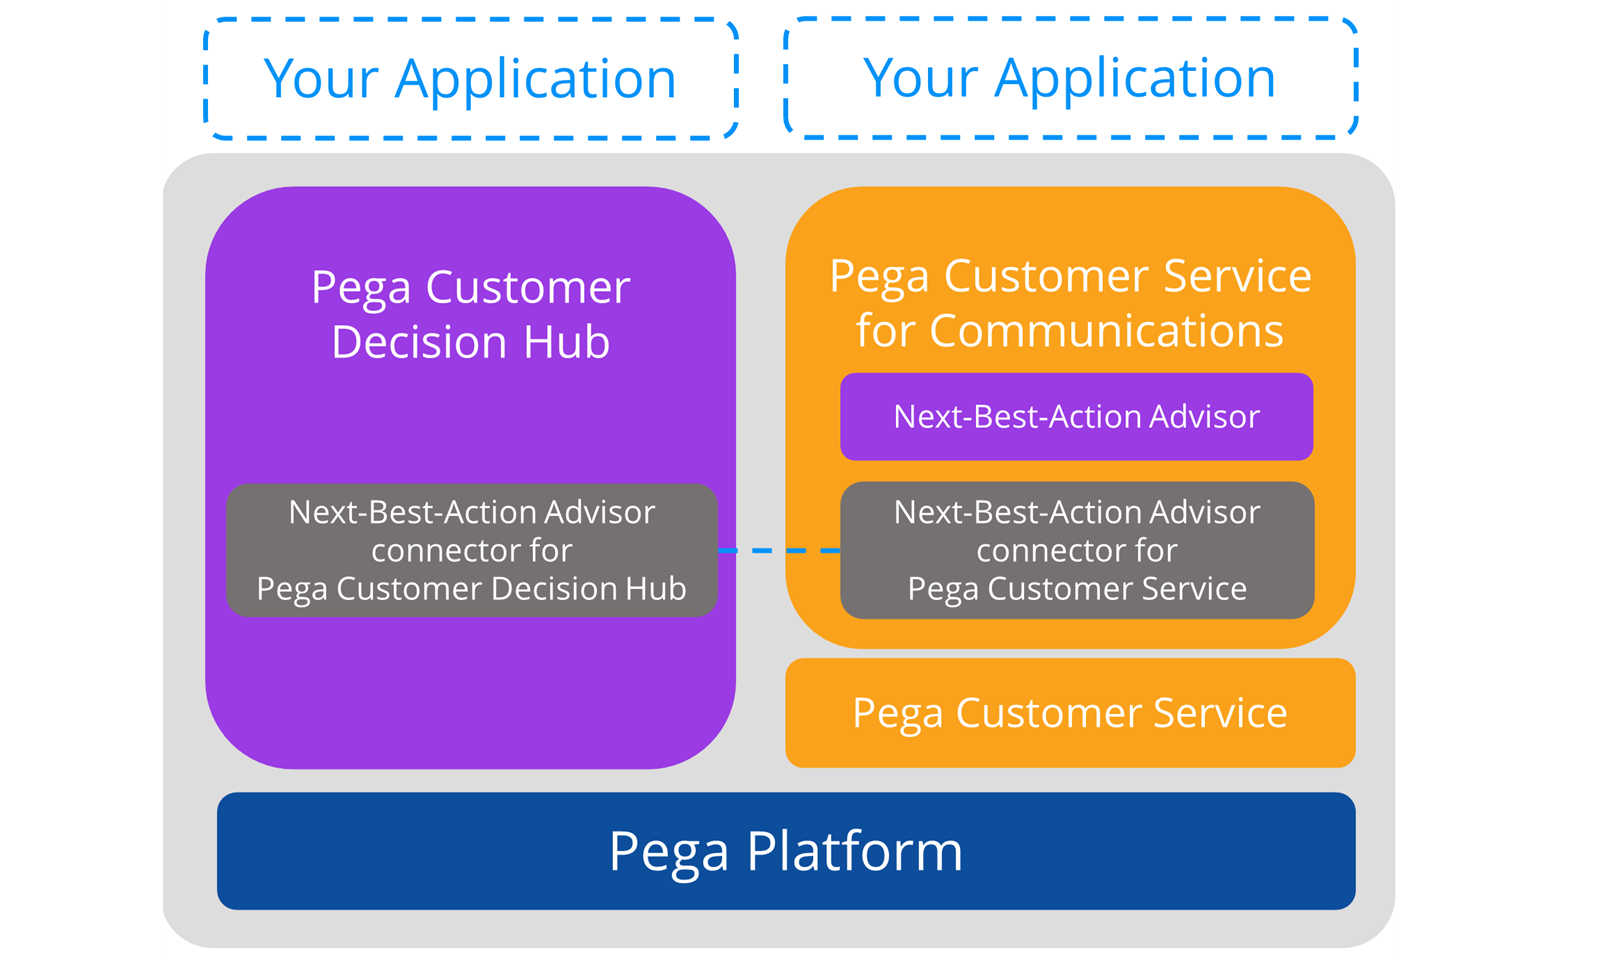 The application stack for pega next best action advisor 2 is built upon pega platform, with your application on top.